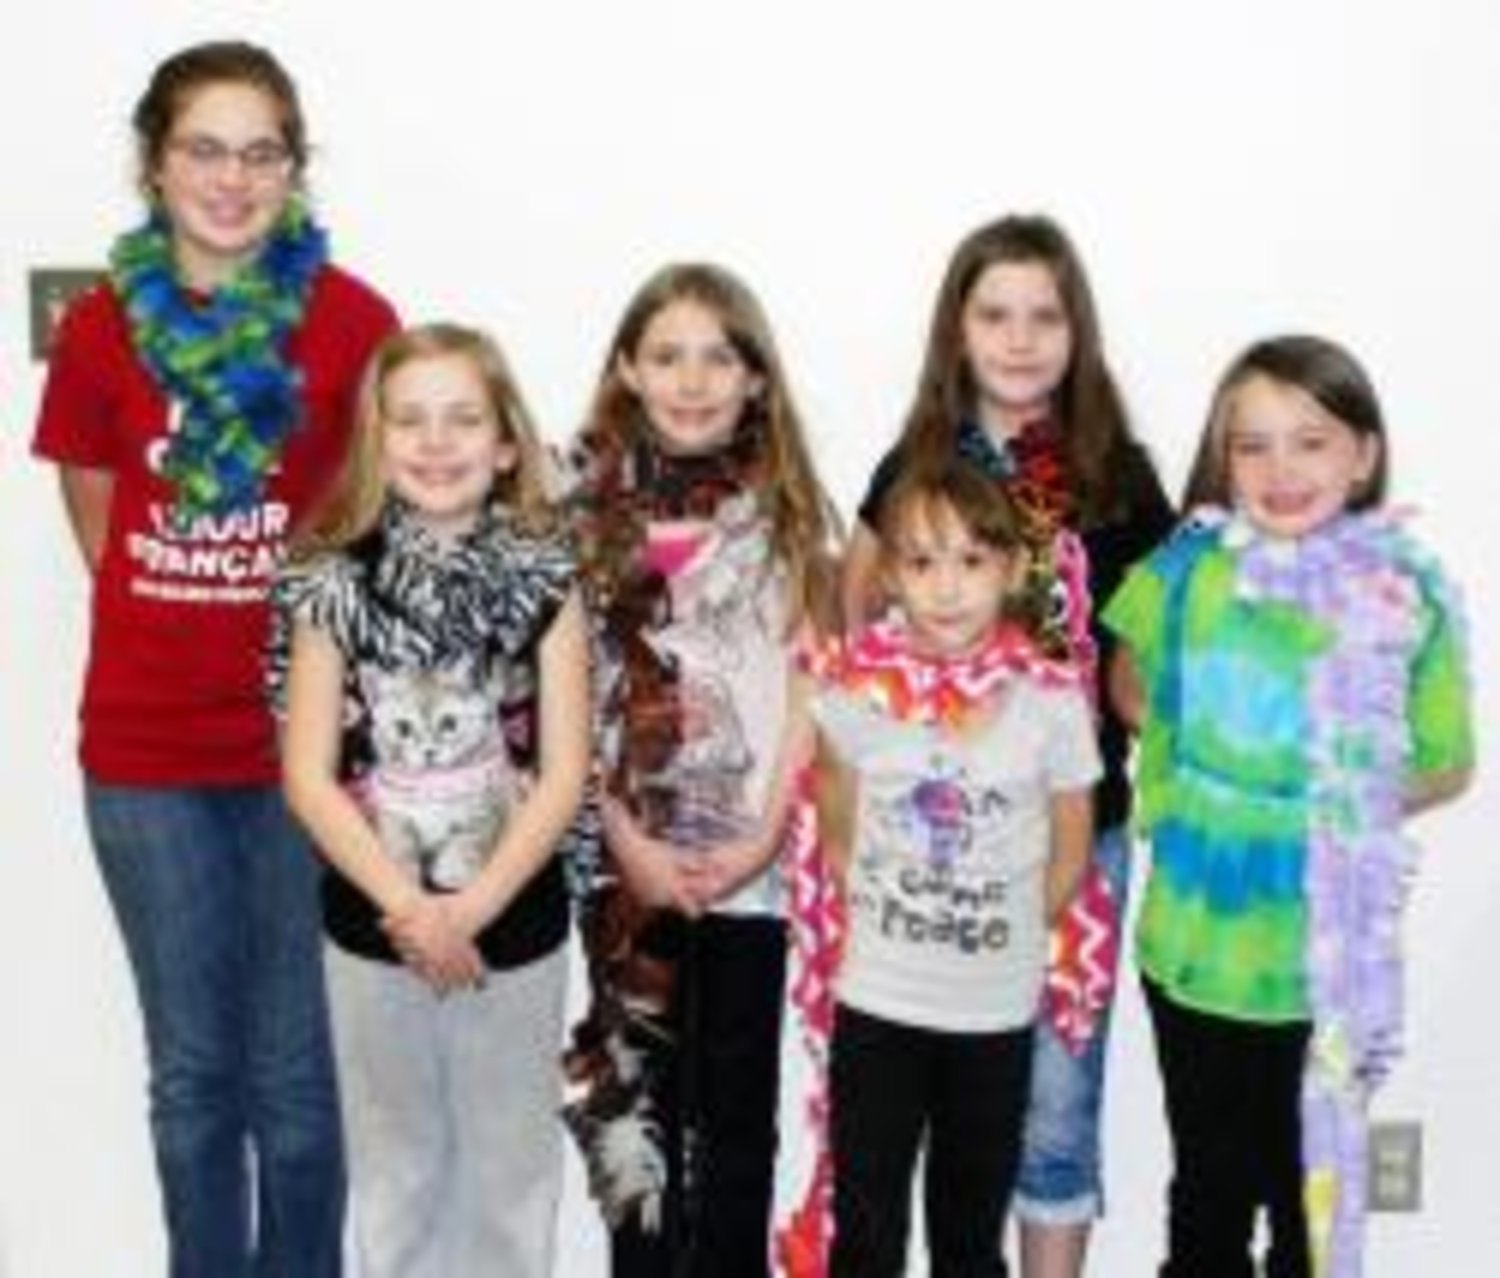 Pictured here are 4-H members who participated in the recent 4-H Clothing Workshop, where they each made their own fleece scarves. Back row, from left to right: Rachel Hays, Ashley Warren, Sara Cross and Destaney Warren. Front row, from left to right: Mia Backer and Faith Gaines.